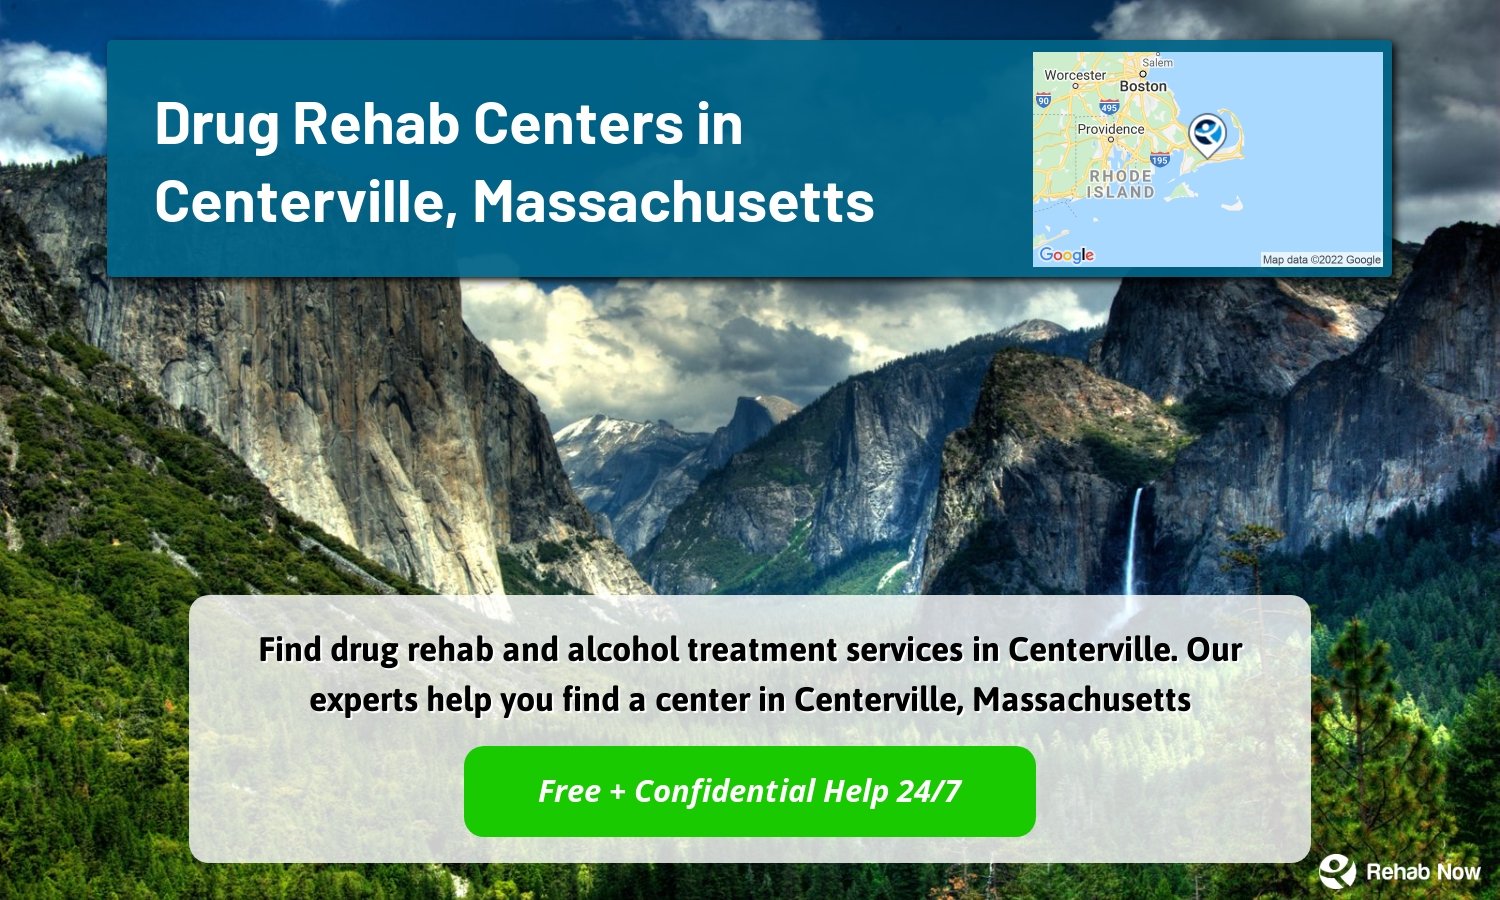 Find drug rehab and alcohol treatment services in Centerville. Our experts help you find a center in Centerville, Massachusetts